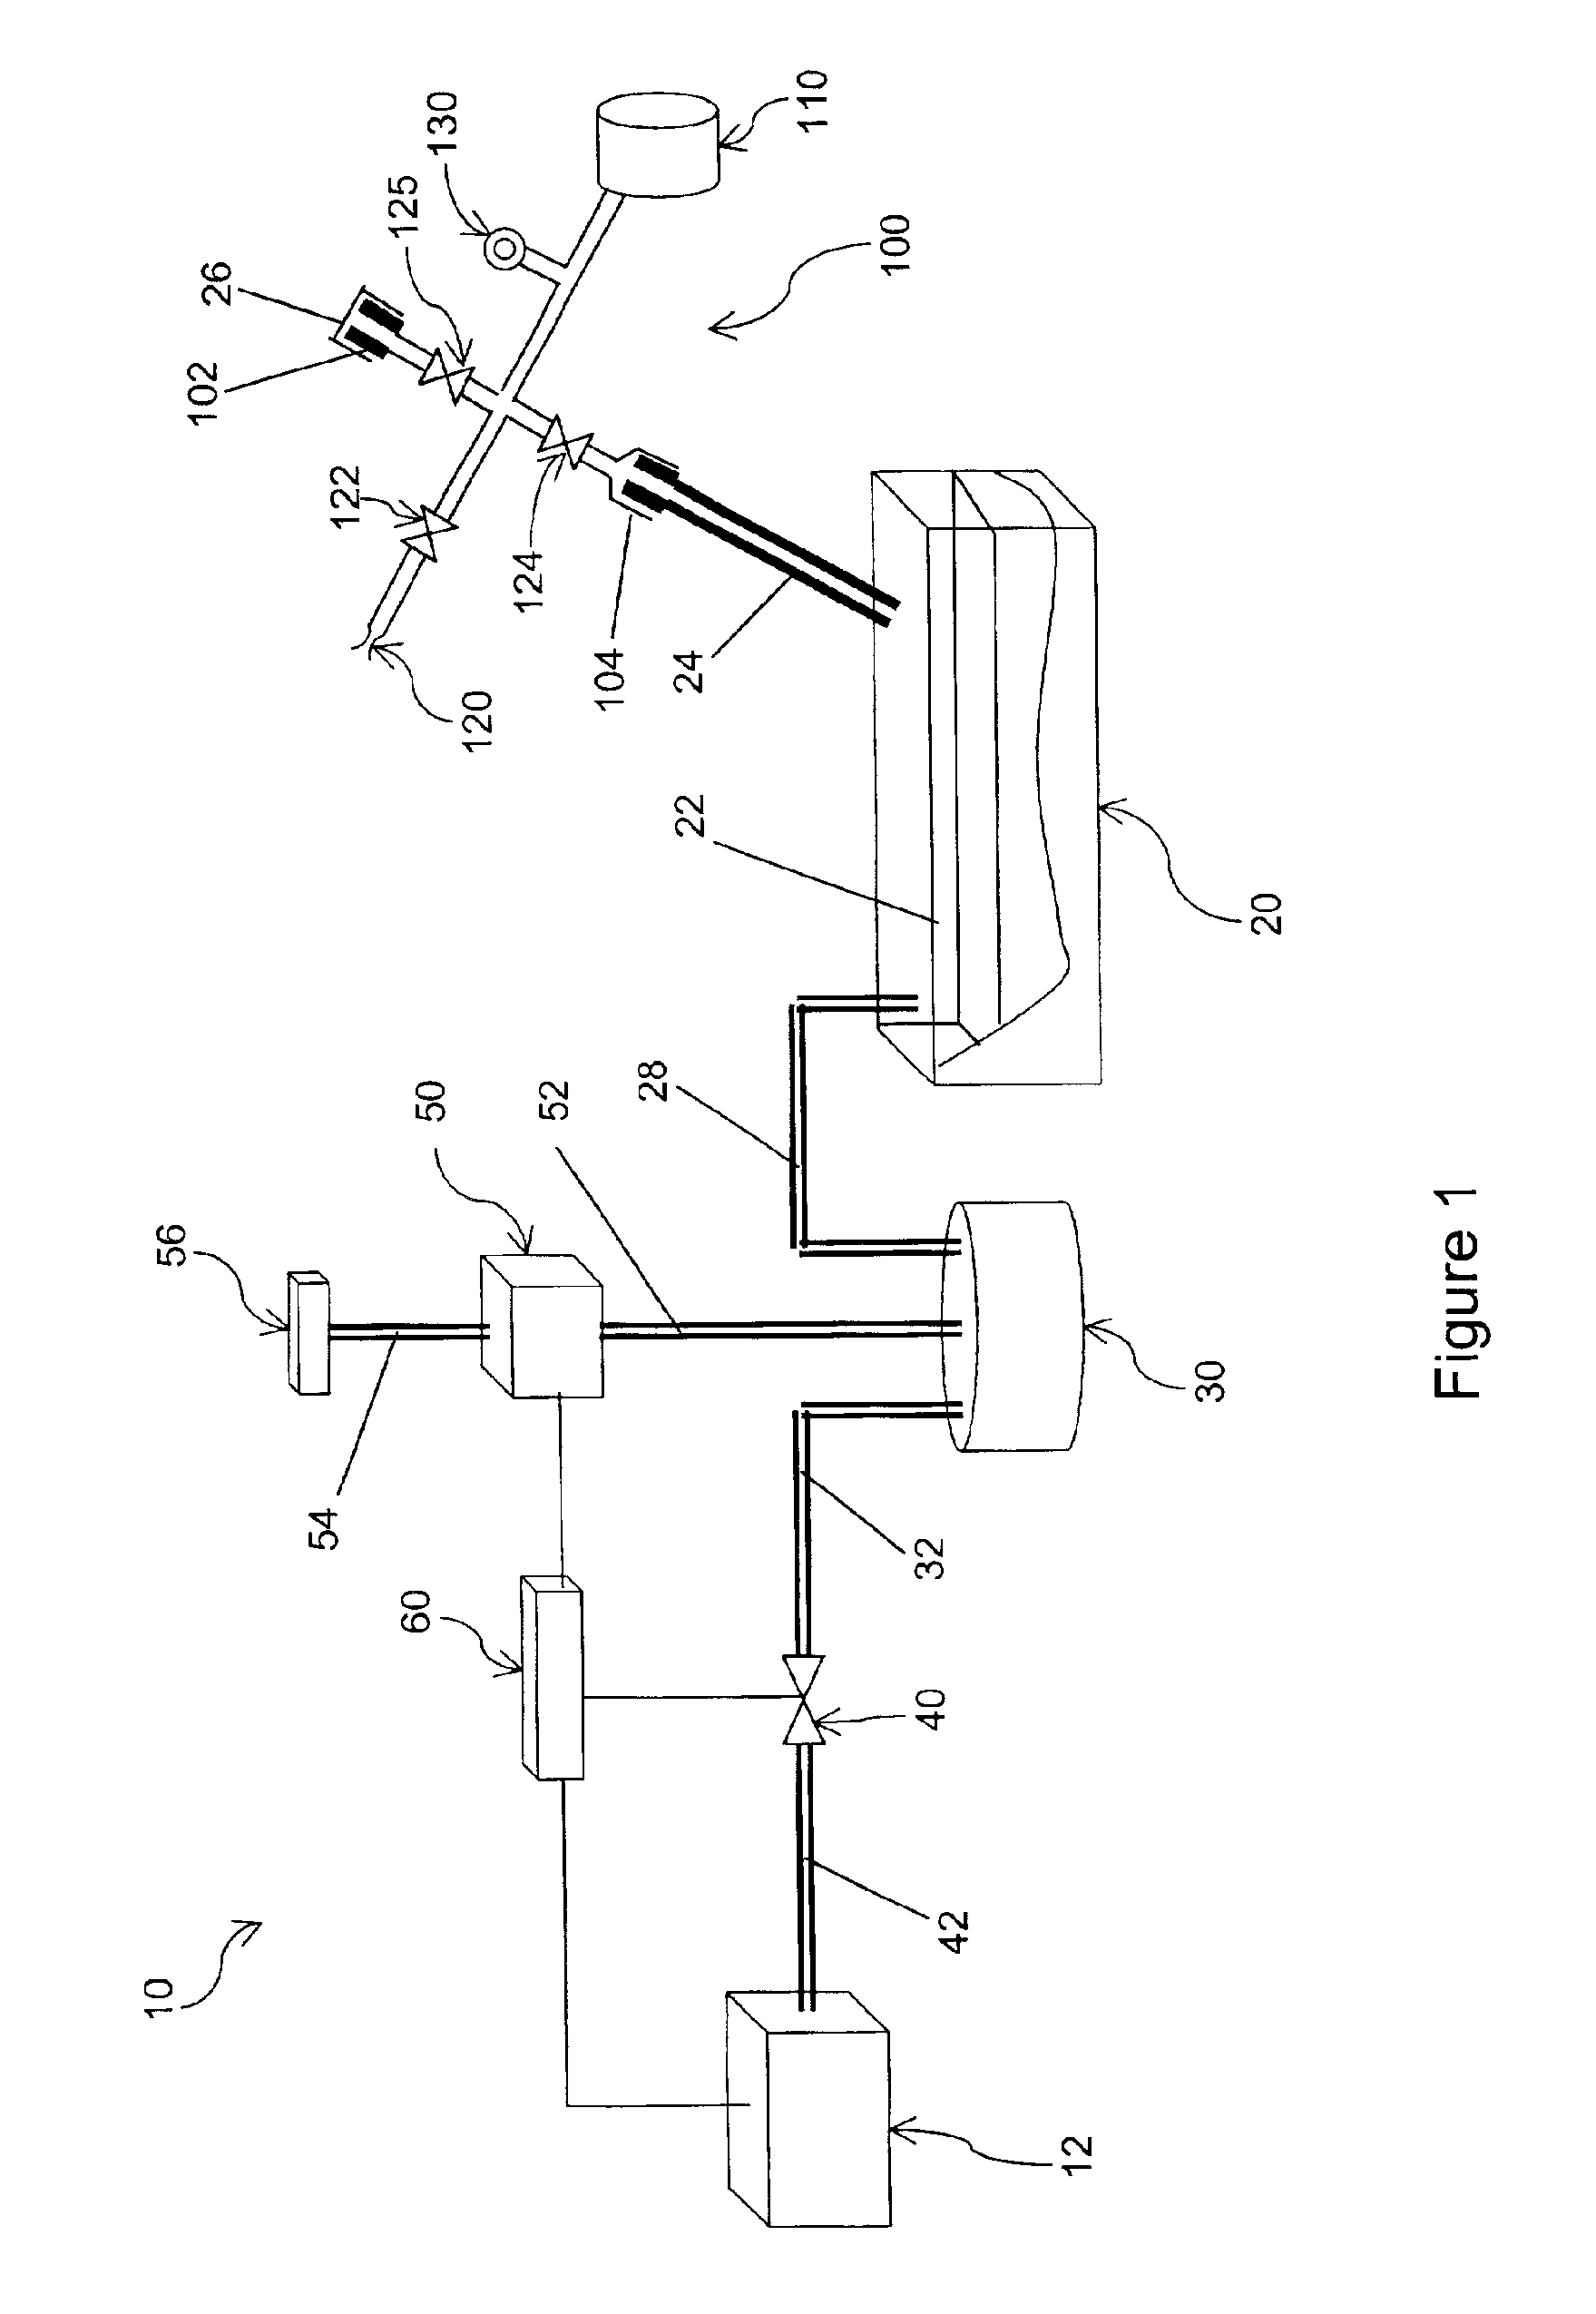 Diagnostic apparatus and method for an evaporative control system including an integrated pressure management apparatus